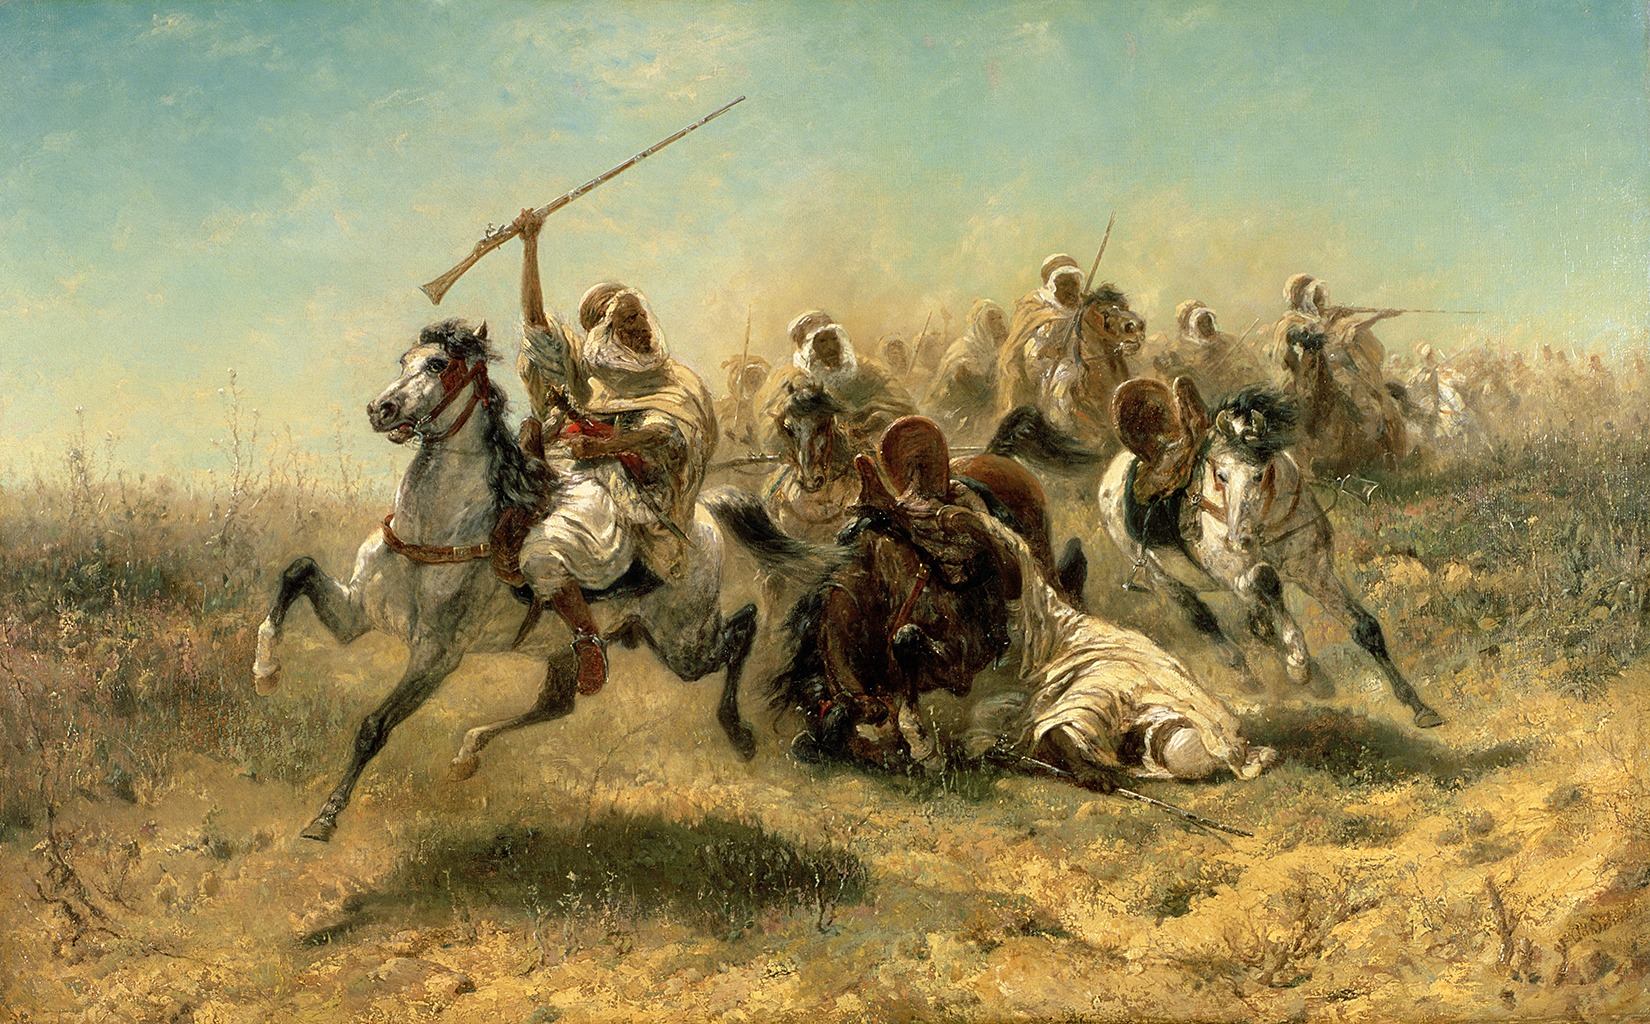 A painting of a large cavalry charge of horsemen over a dry and rocky grass field. The men are holding and firing rifles and wearing large white tunics and hoods. The leading horseman raises his rifle in the air with one hand. To his right, a fellow horseman lays on the ground presumably dead, with his horse crumpled over.